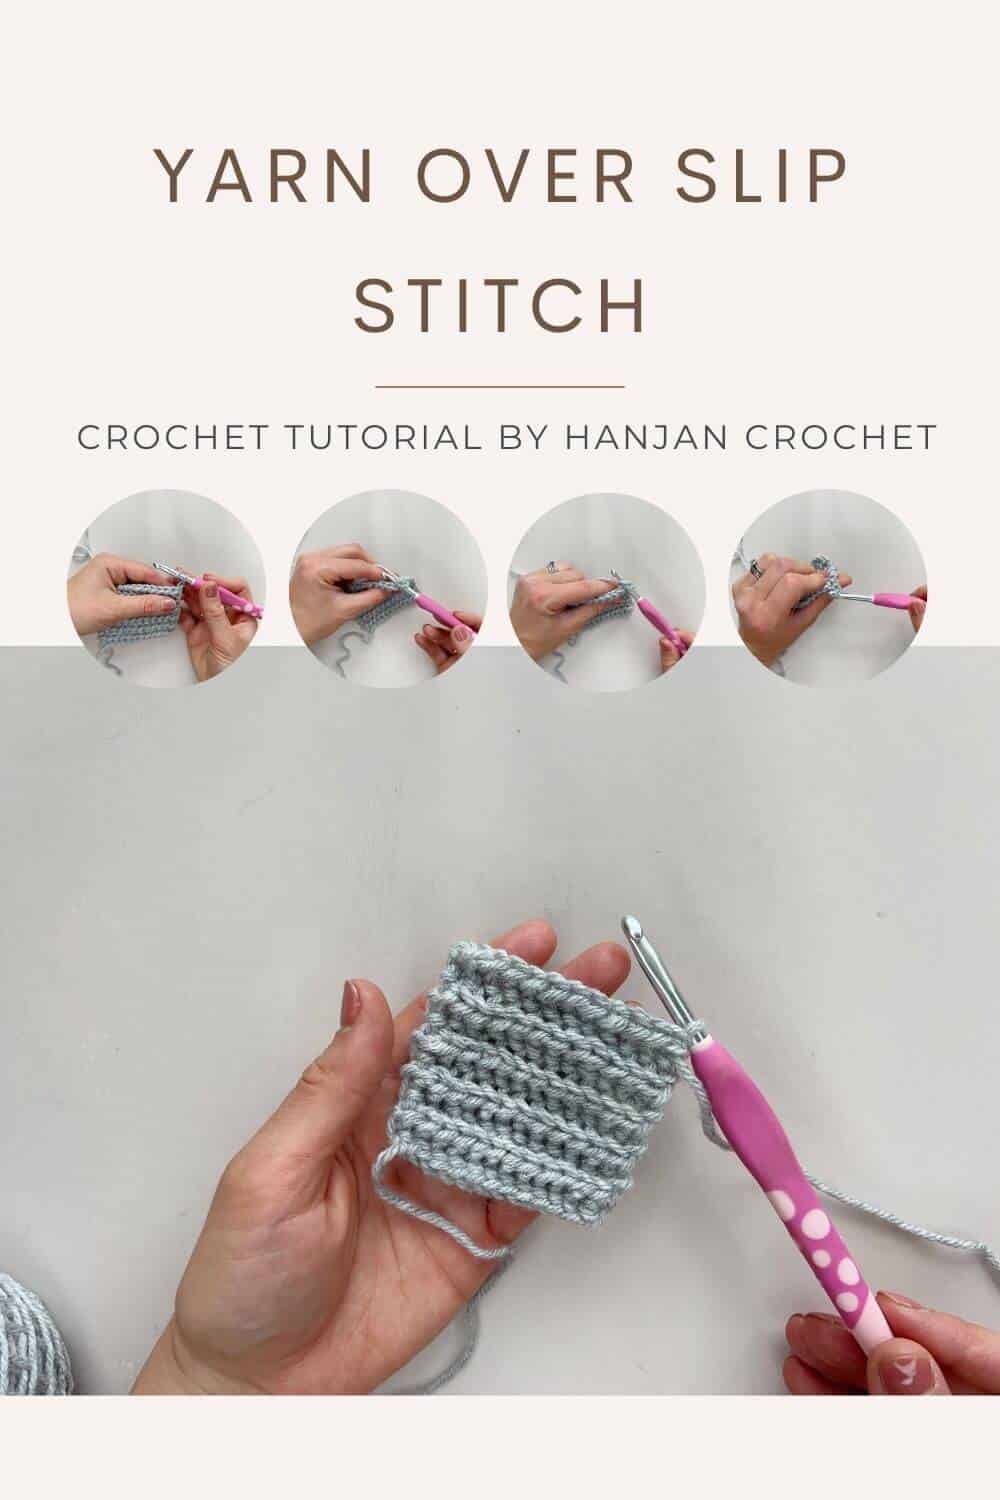 Learn how to create beautiful crochet projects with the easy-to-follow yarn over slip stitch tutorial by HanJan Crochet.